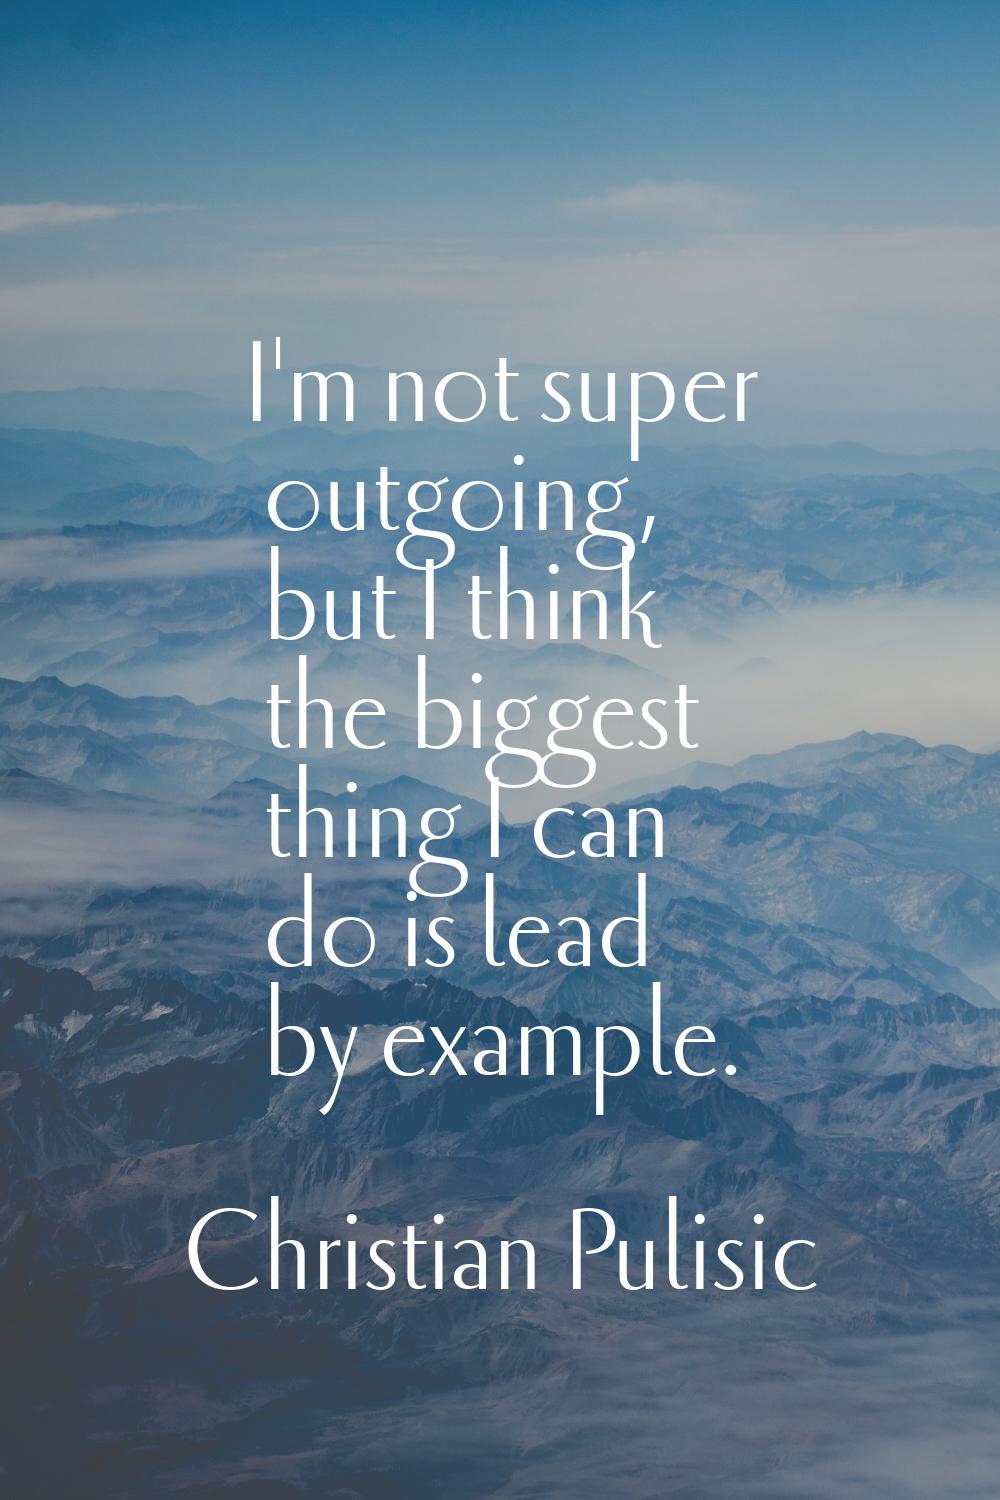 I'm not super outgoing, but I think the biggest thing I can do is lead by example.